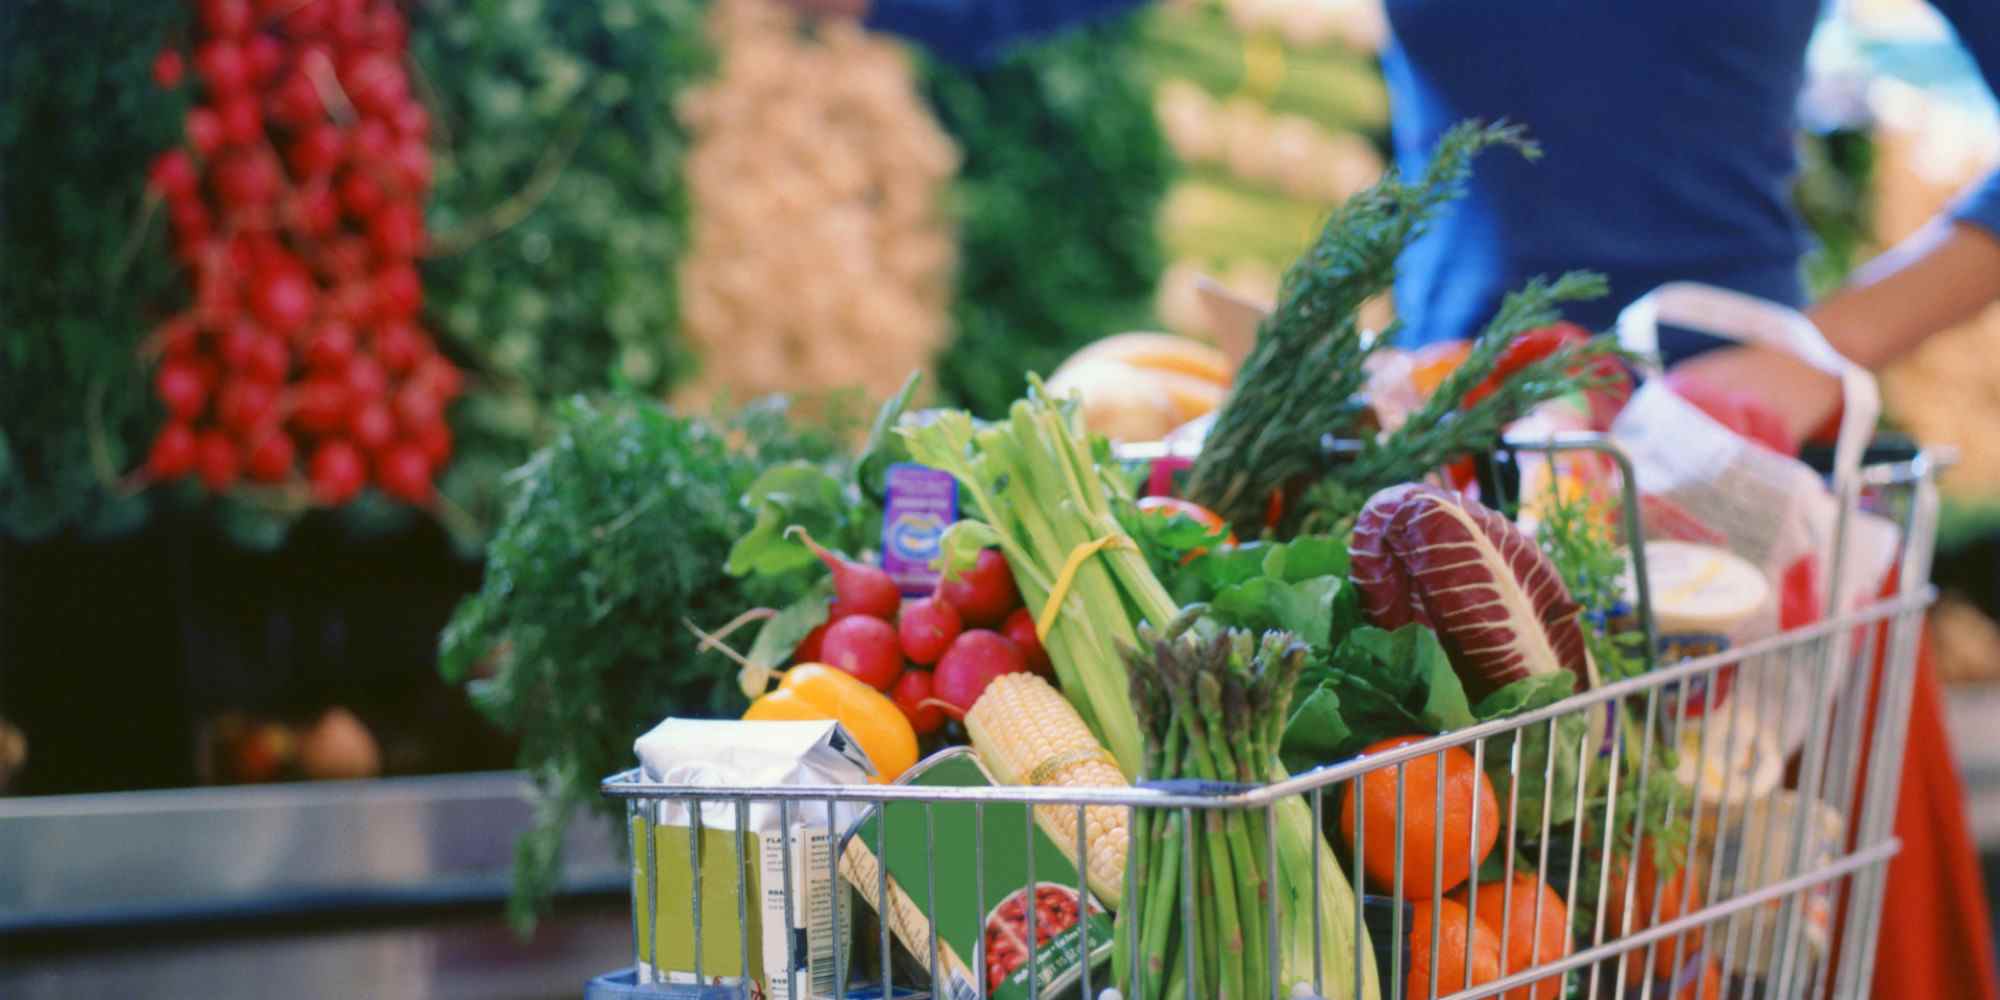 Grocery cart with healthy foods for runners